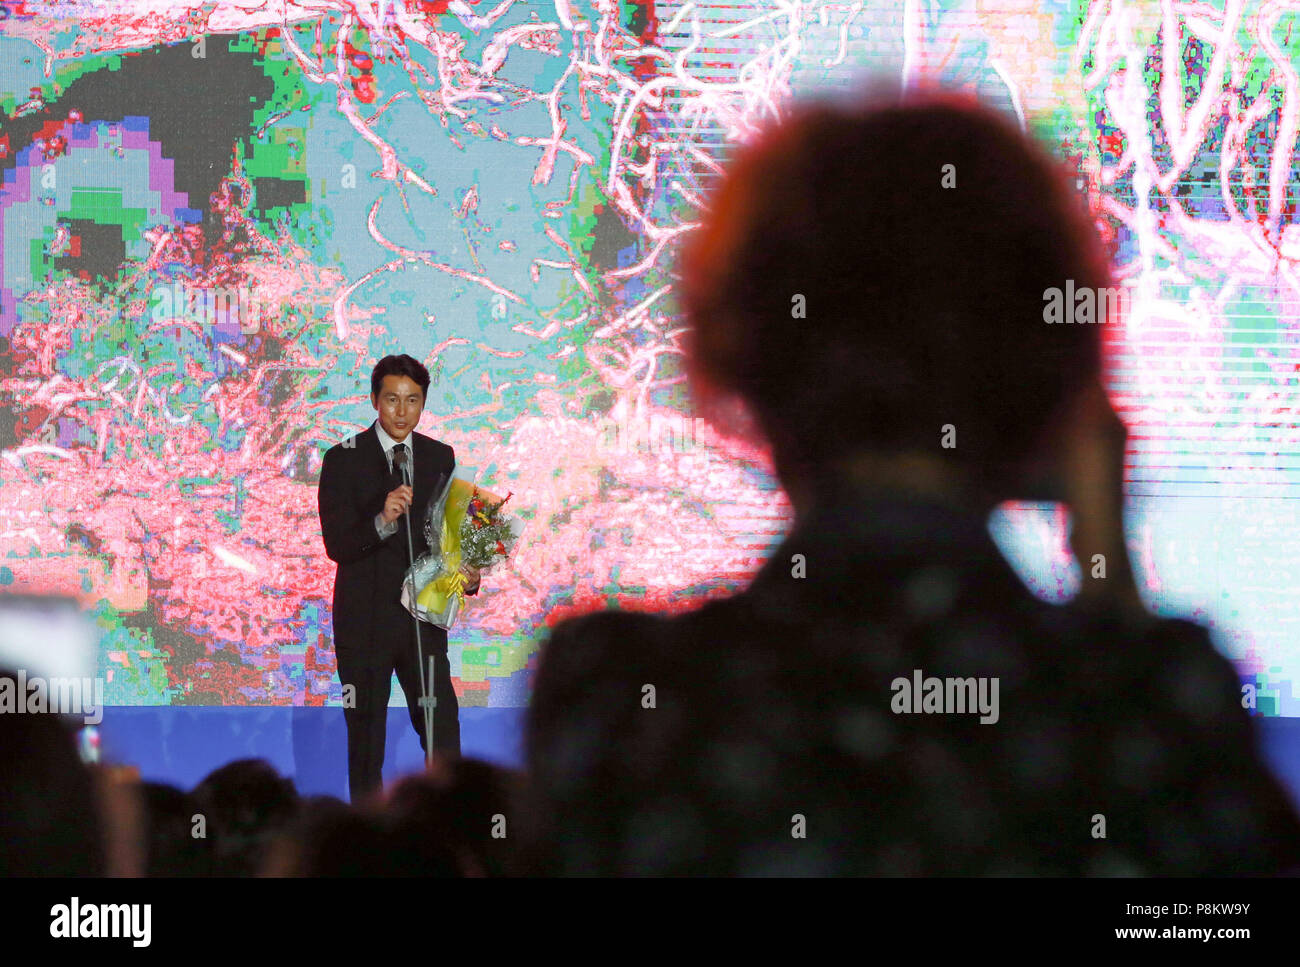 Bucheon, South Korea. 12th July, 2018. South Korean actor Jung Woo-sung addresses the opening ceremony of the 22nd Bucheon International Fantastic Film Festival in Bucheon, South Korea, July 12, 2018. The 10-day 22nd Bucheon International Fantastic Film Festival, with its theme as 'Love, Fantasy and Adventure', kicked off here Thursday. Credit: Wang Jingqiang/Xinhua/Alamy Live News Stock Photo